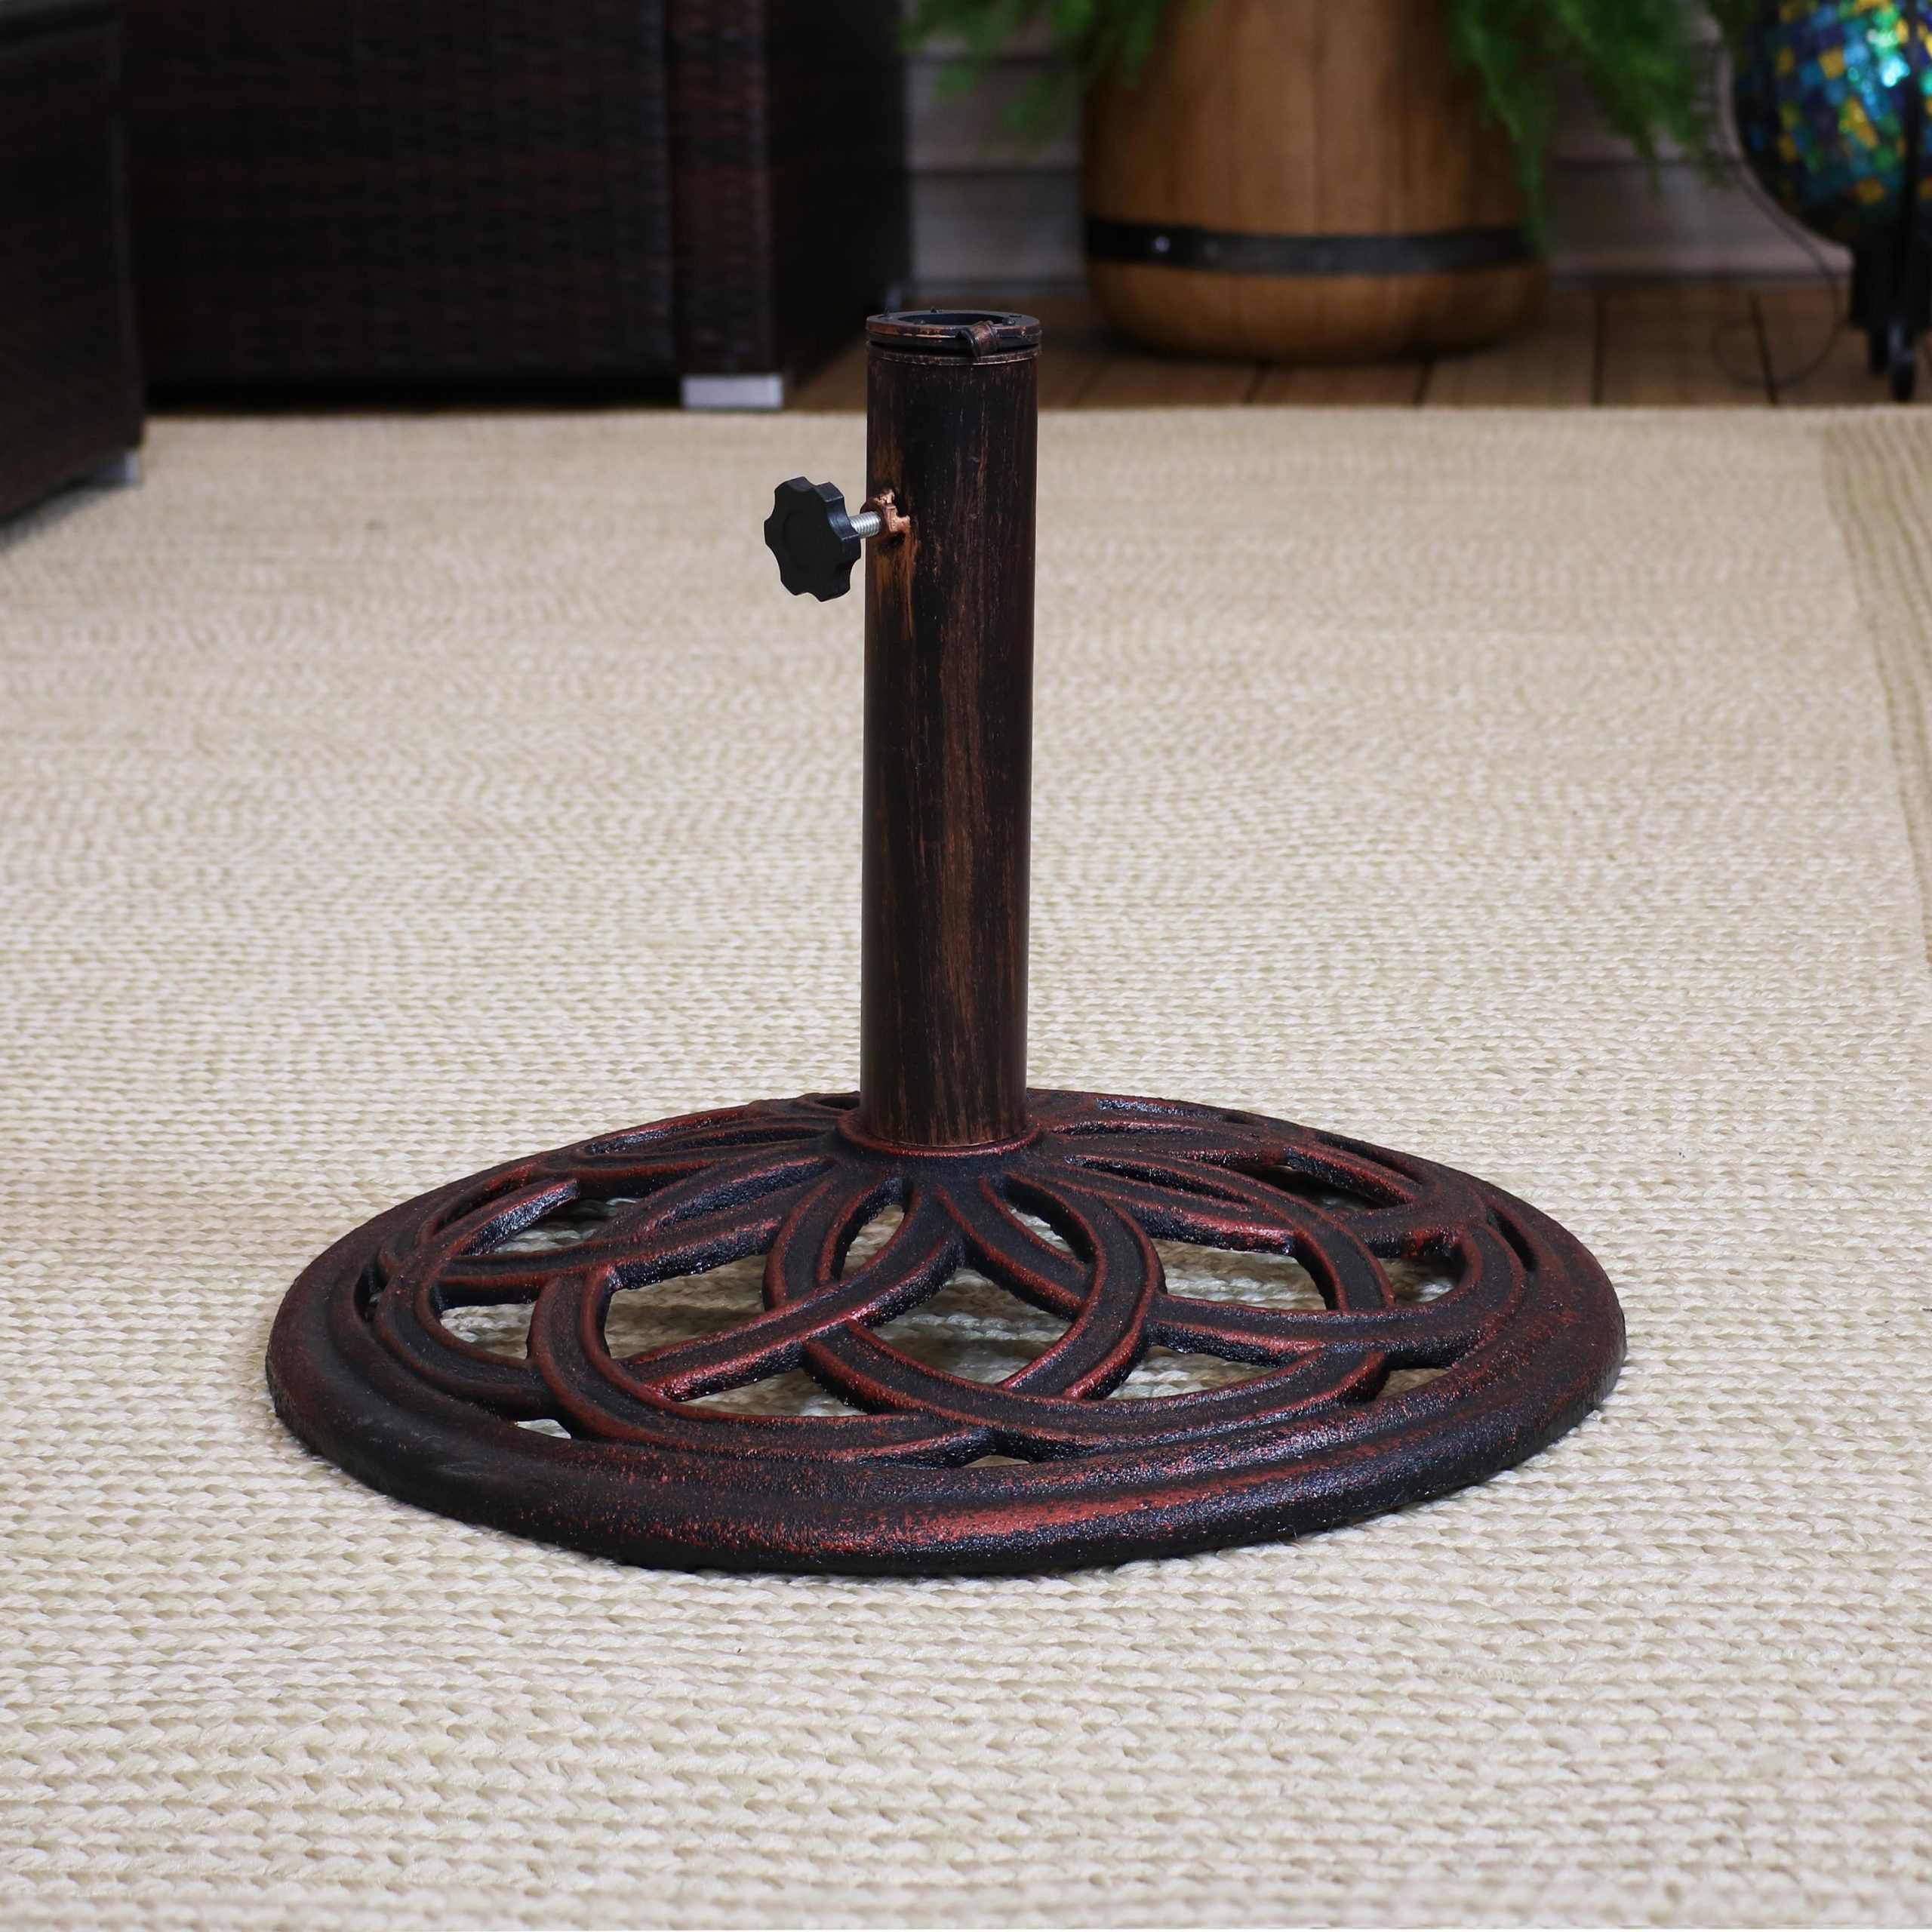 Sunnydaze Cast Iron Umbrella Base With Celtic Knot Design, 17 Inch Diameter  – Walmart Throughout Most Current Celtic Knot Iron Garden Benches (View 28 of 30)